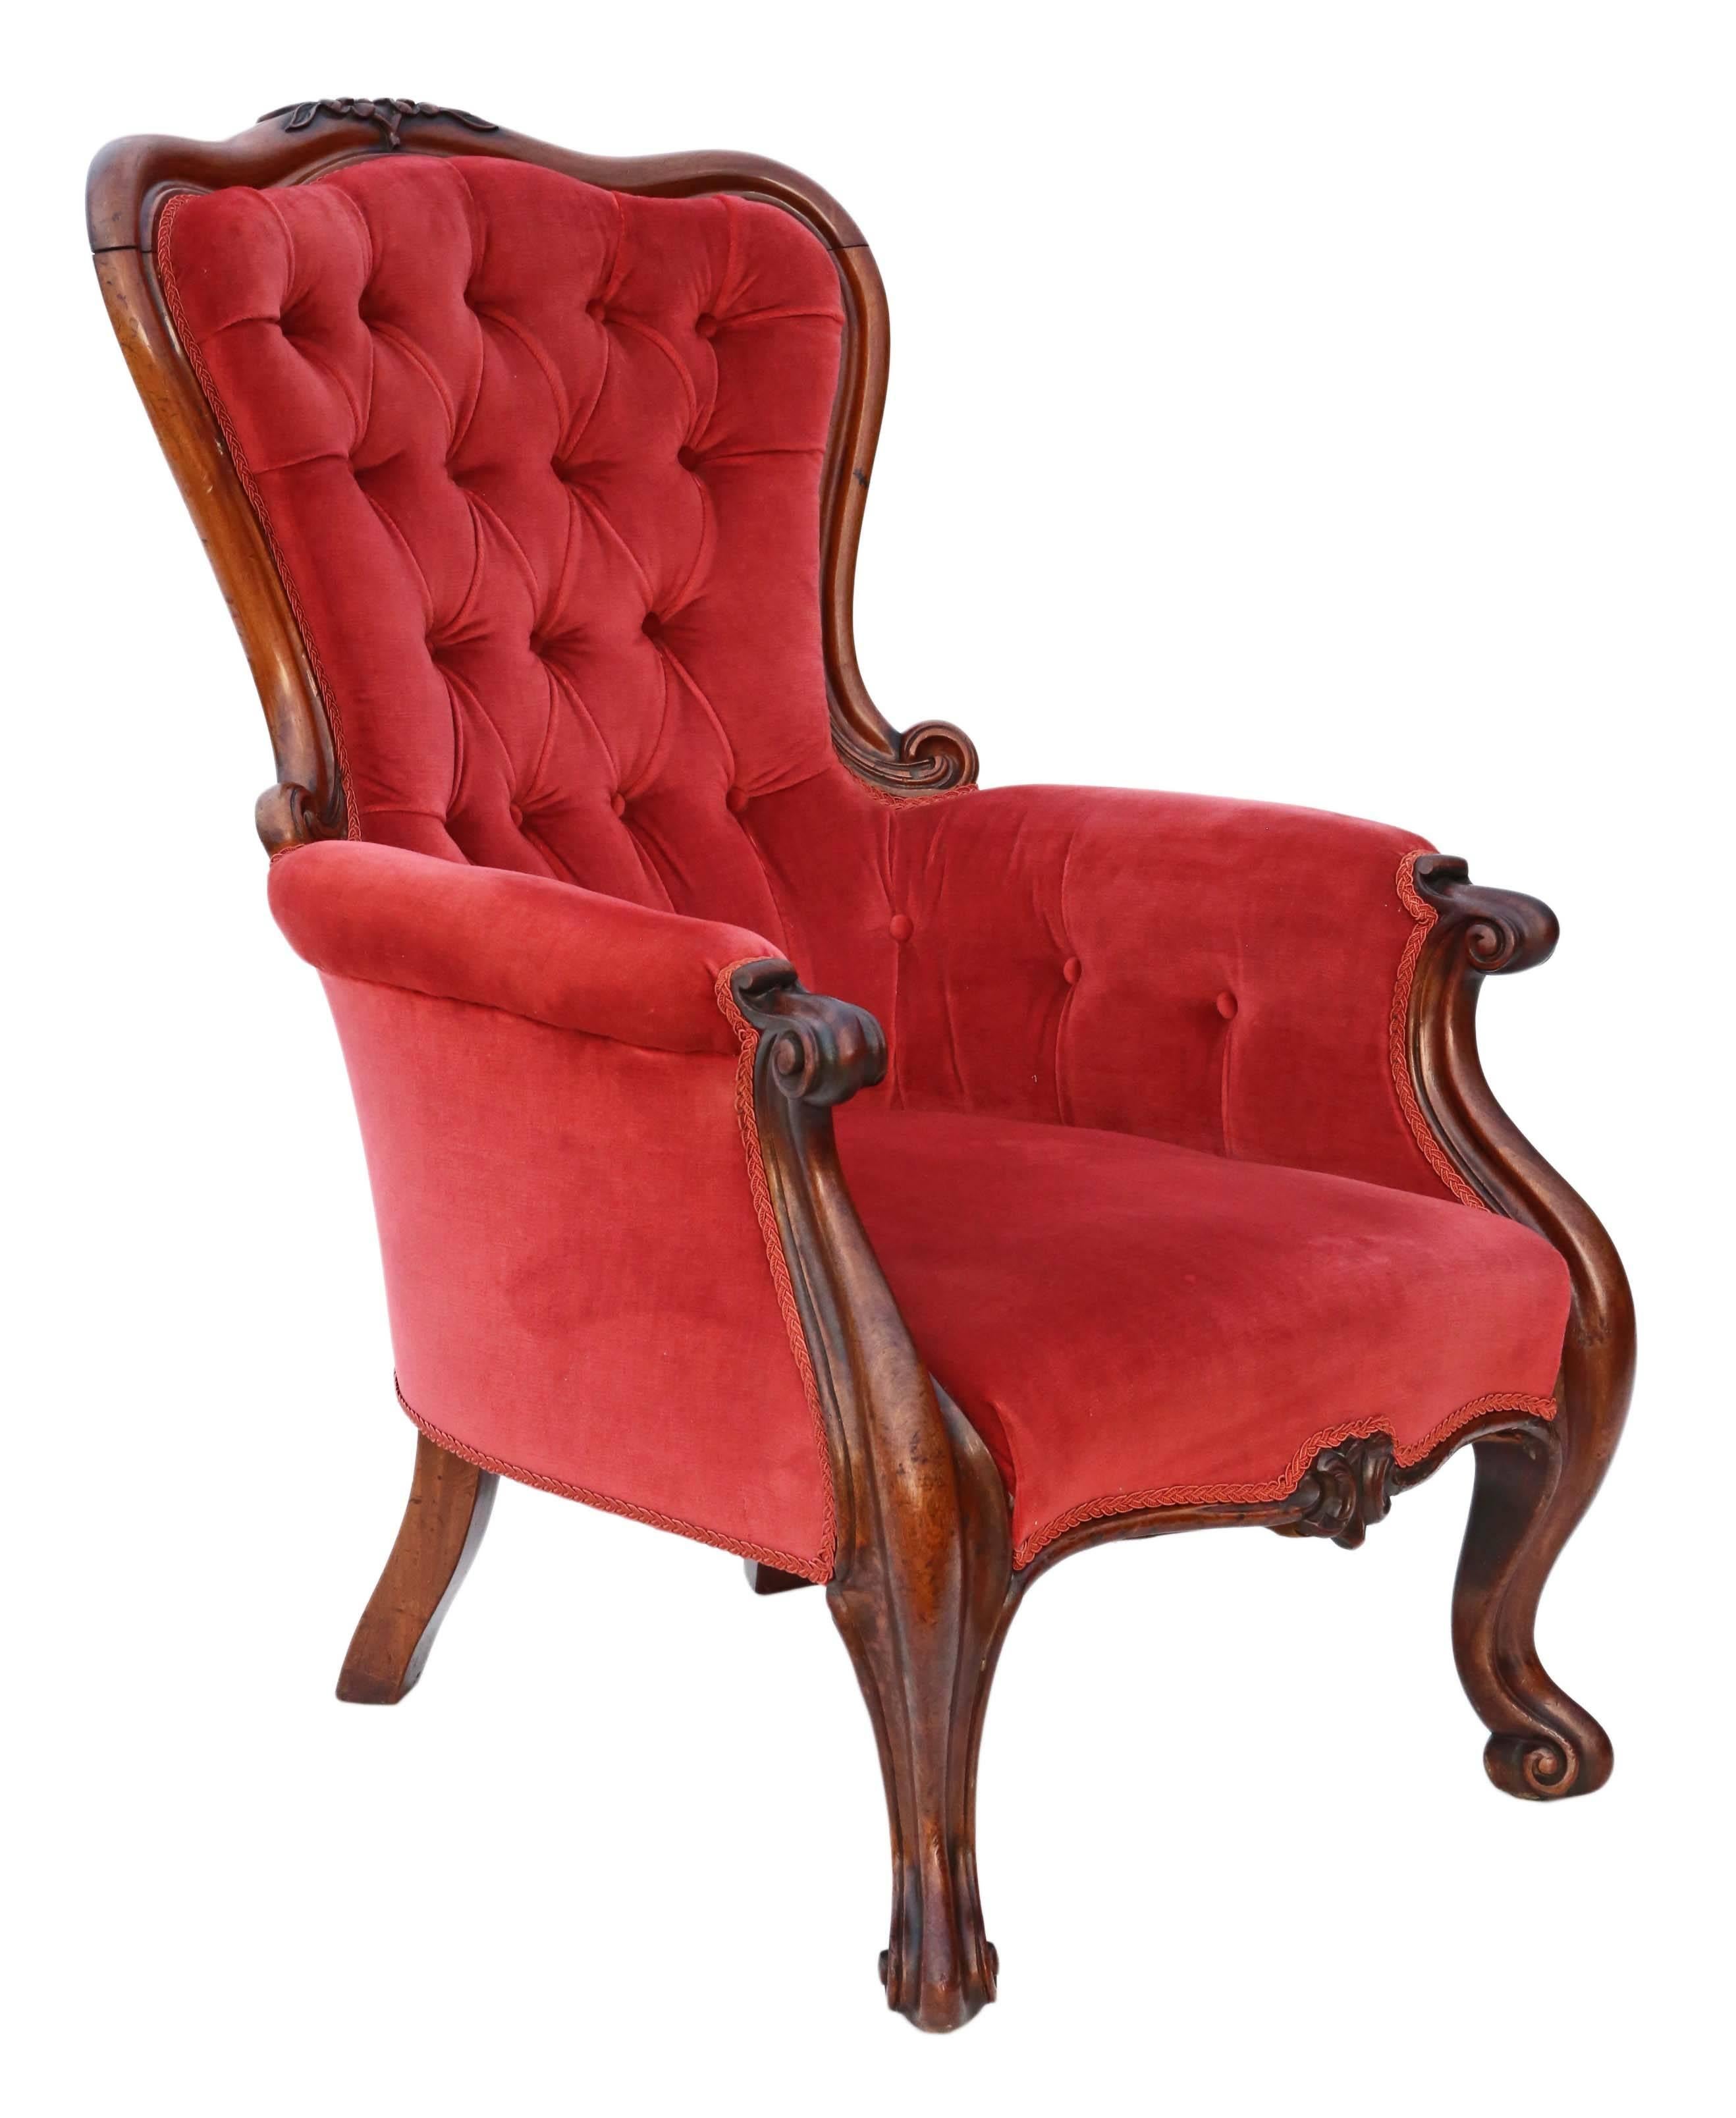 Late 19th Century Antique Quality Victorian circa 1870 Mahogany Slipper Spoon Back Armchair For Sale